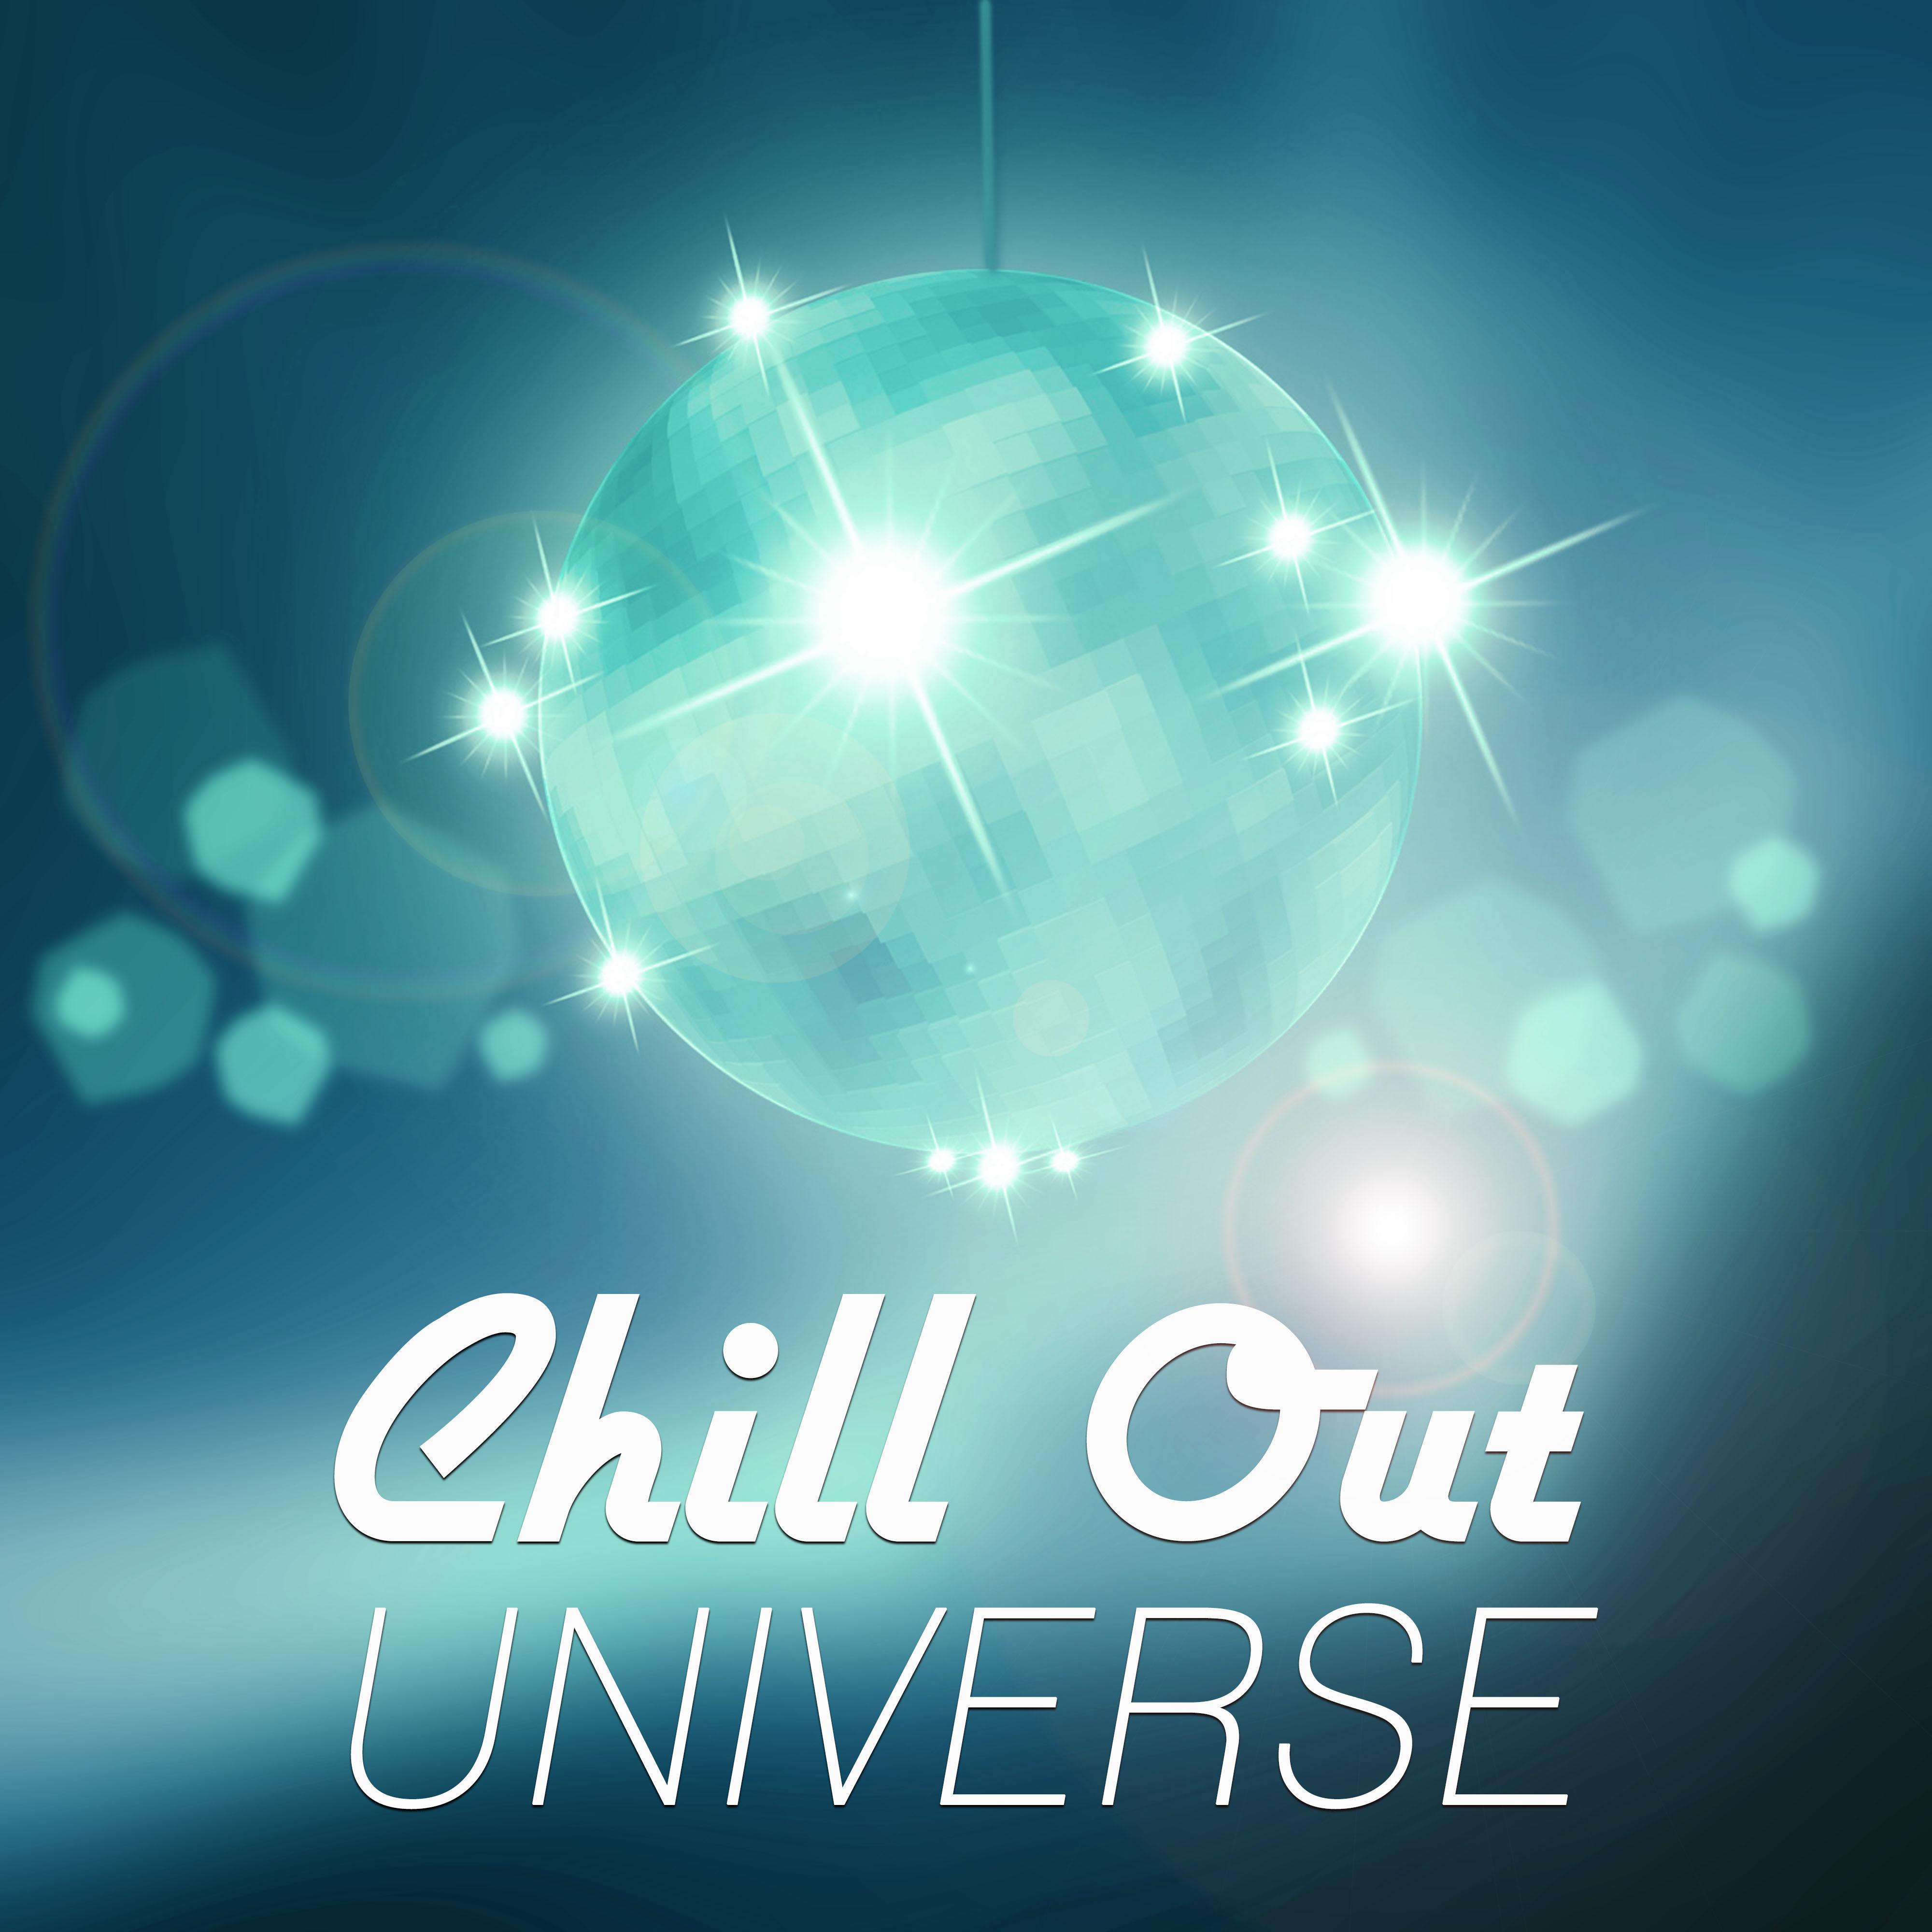 Chill Out Universe - Serenity Chill, Summer Chill, Holiday Chill Out